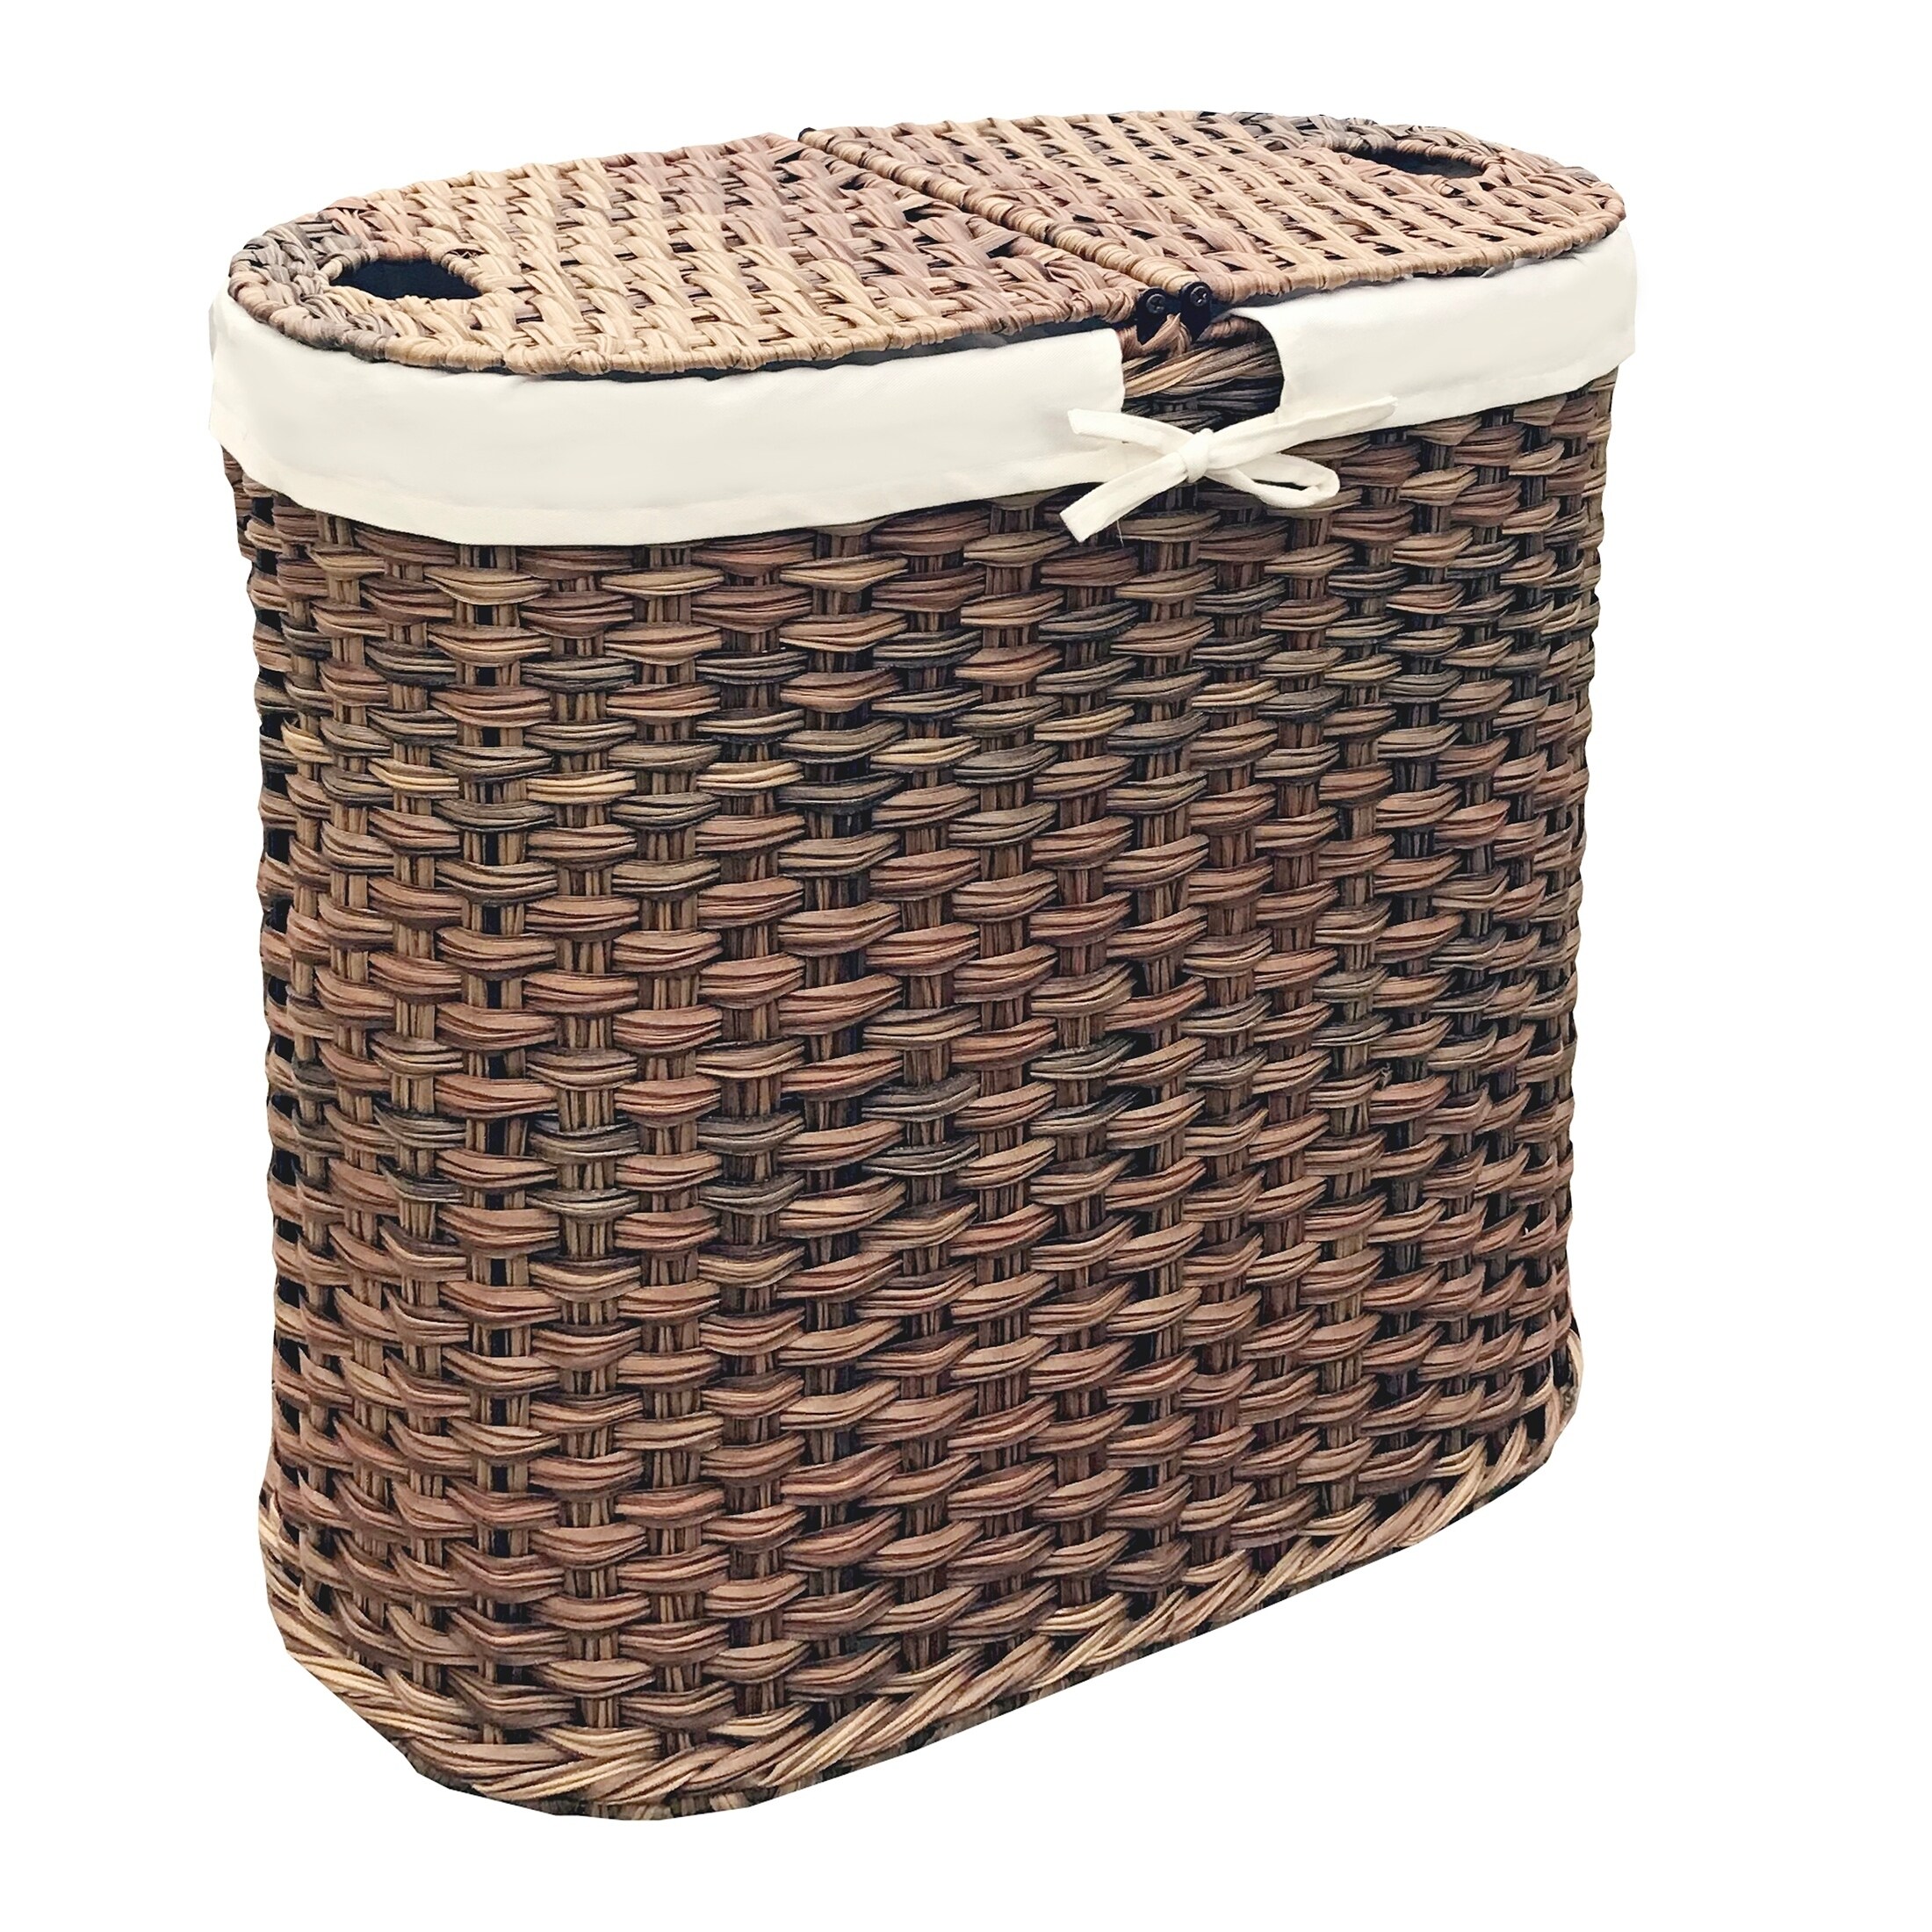 Seville Classics Hand-Woven Oval Double Laundry Hamper /W Liner